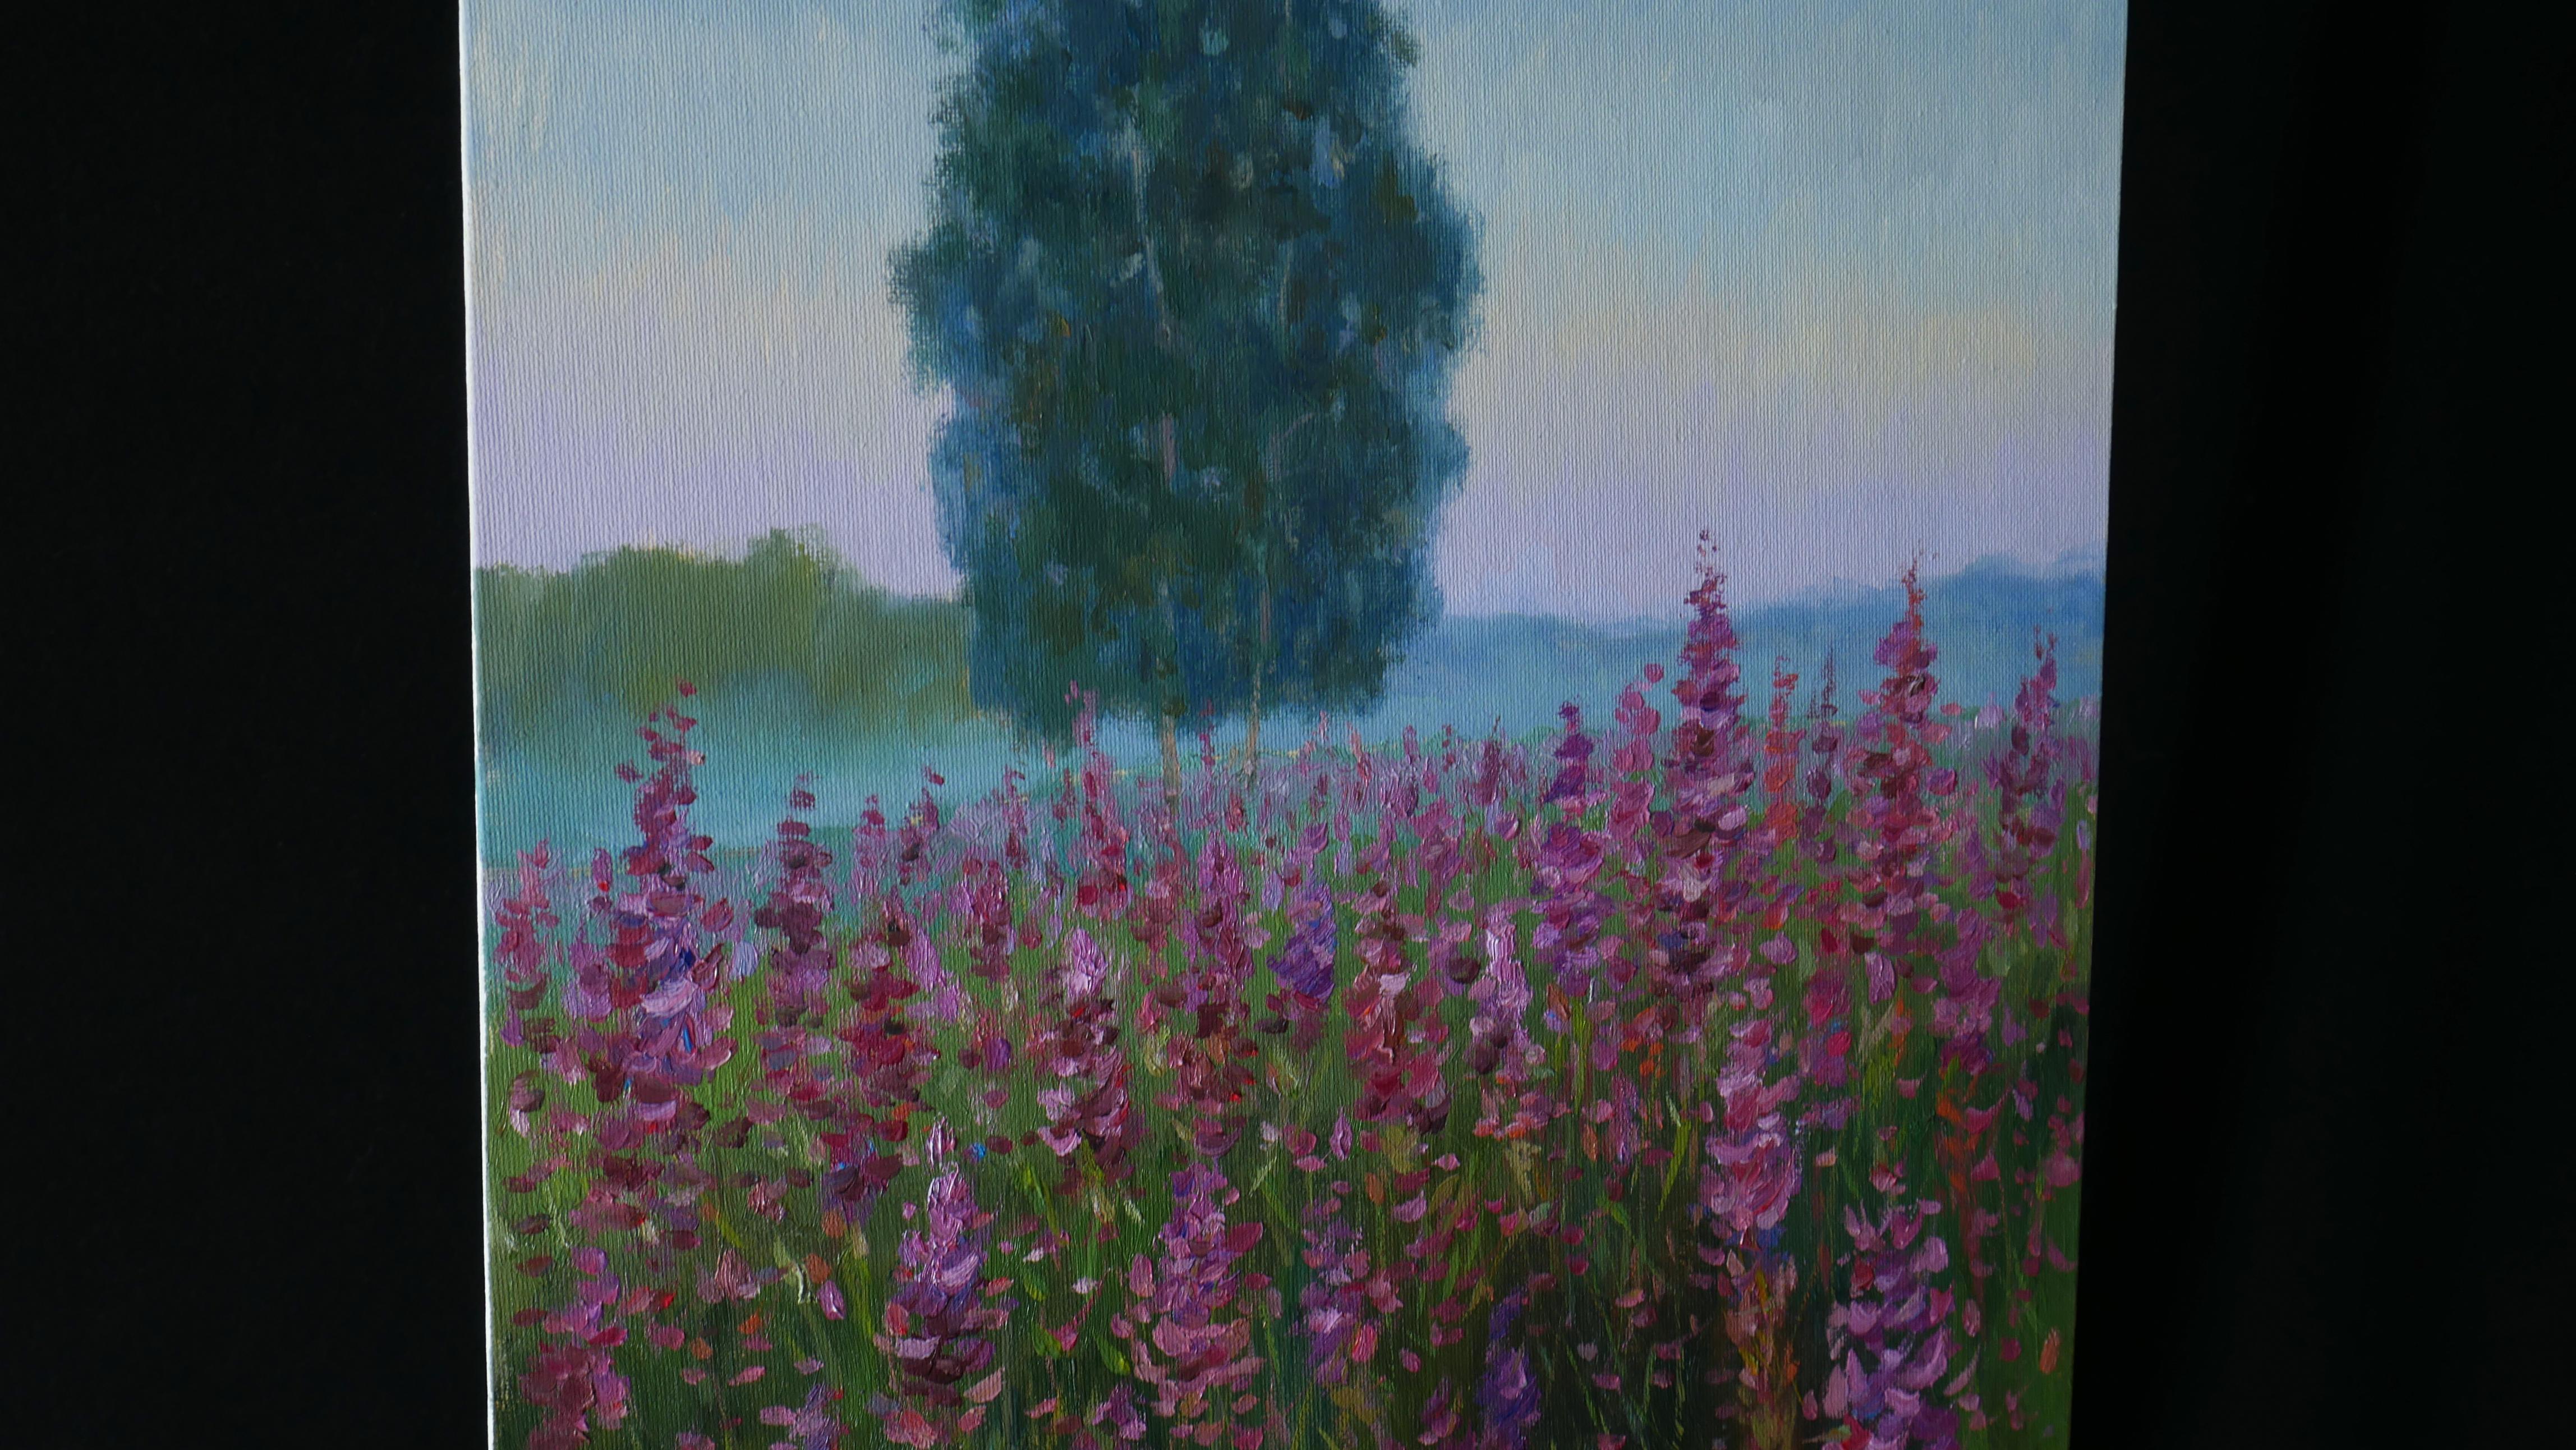 The Morning Over The Fireweed Field - summer landscape painting - Impressionist Painting by Nikolay Dmitriev